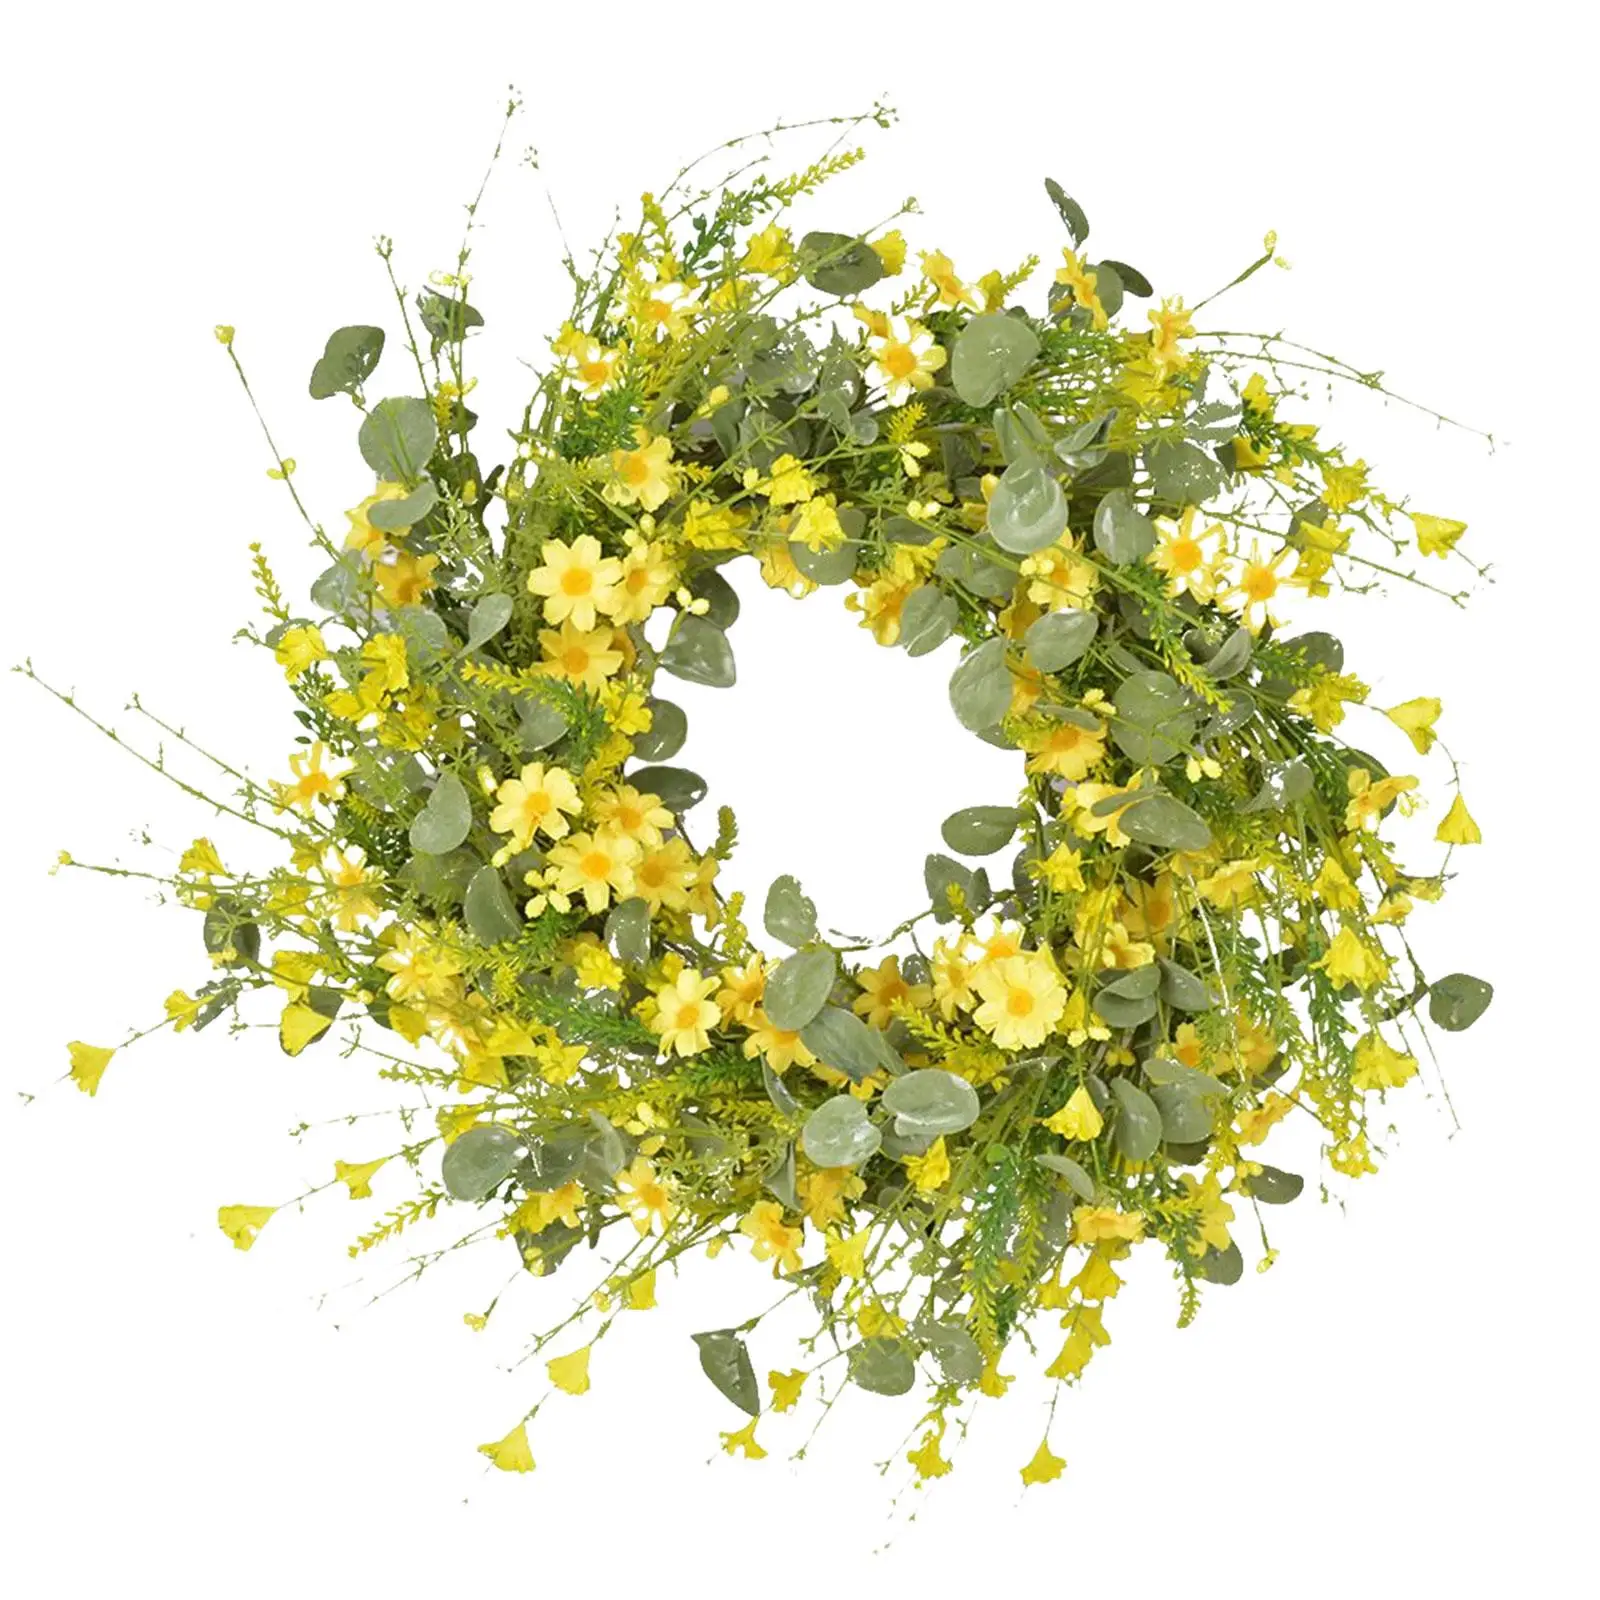 Simulation Daisy Eucalyptus Wreath Front Door Garland Artificial Flower Wreath for Home Decor Holidays Photo Prop Easter Window